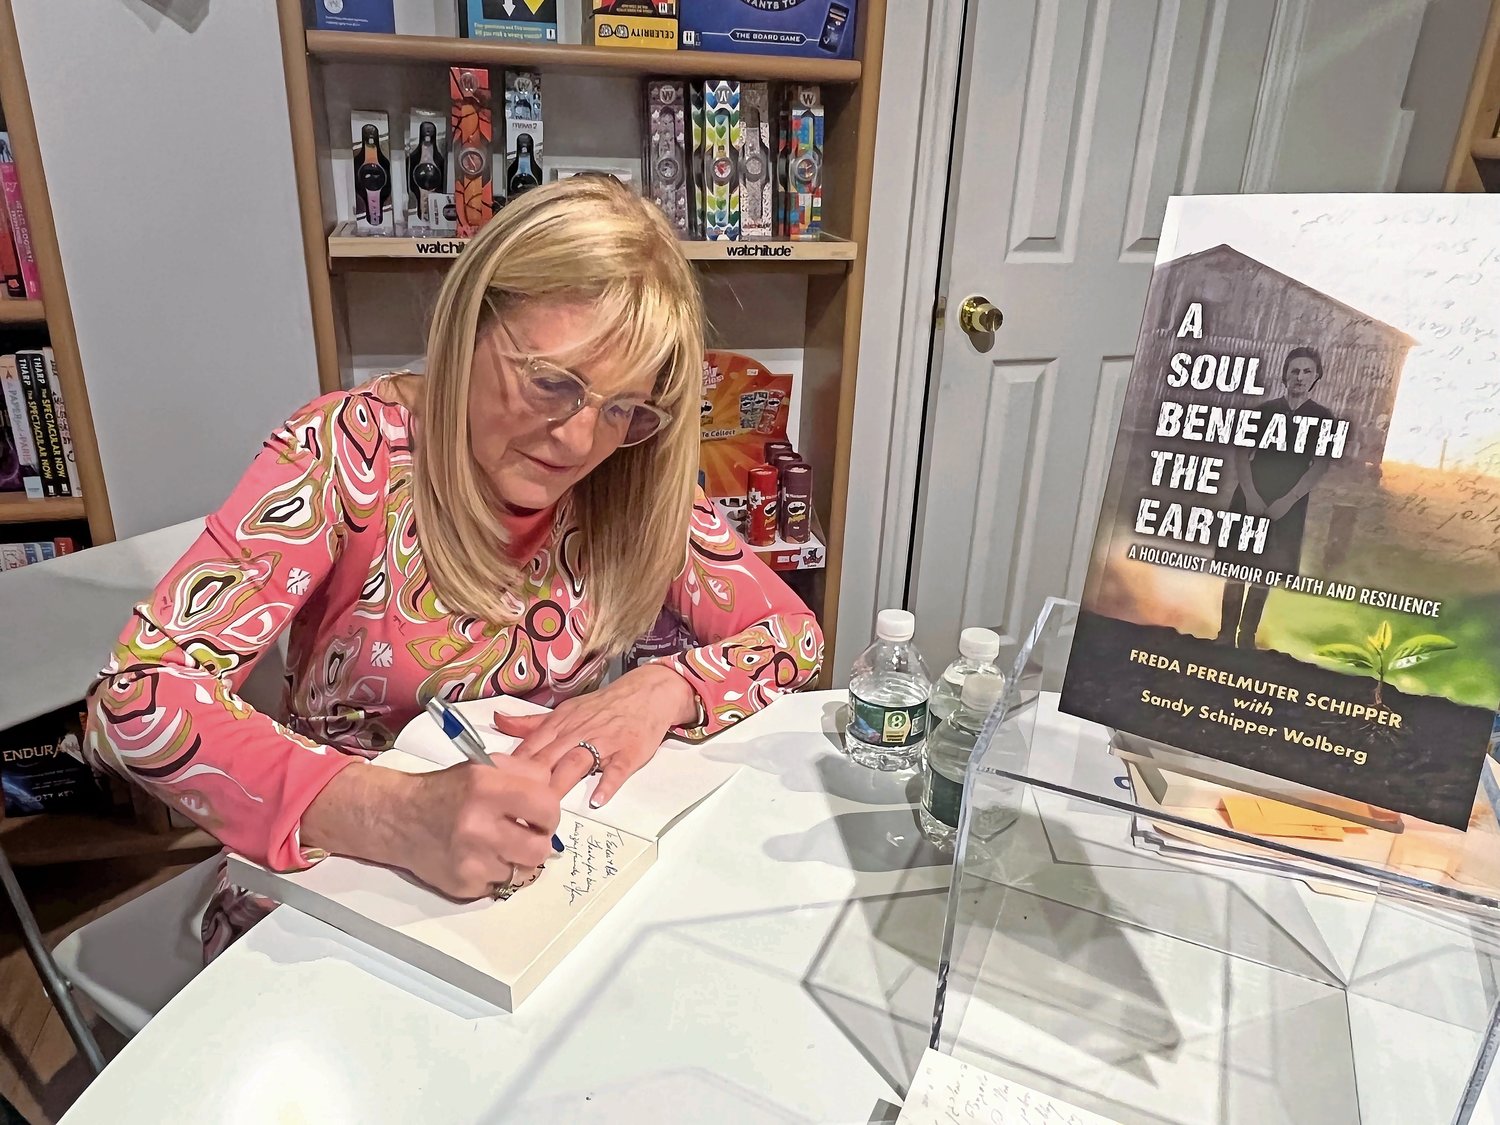 After eight years of writing and revising, Woodsburgh resident Sandy Wolberg completed “A Soul Beneath the Earth: A Holocaust Memoir of Faith and Resilience” in June.